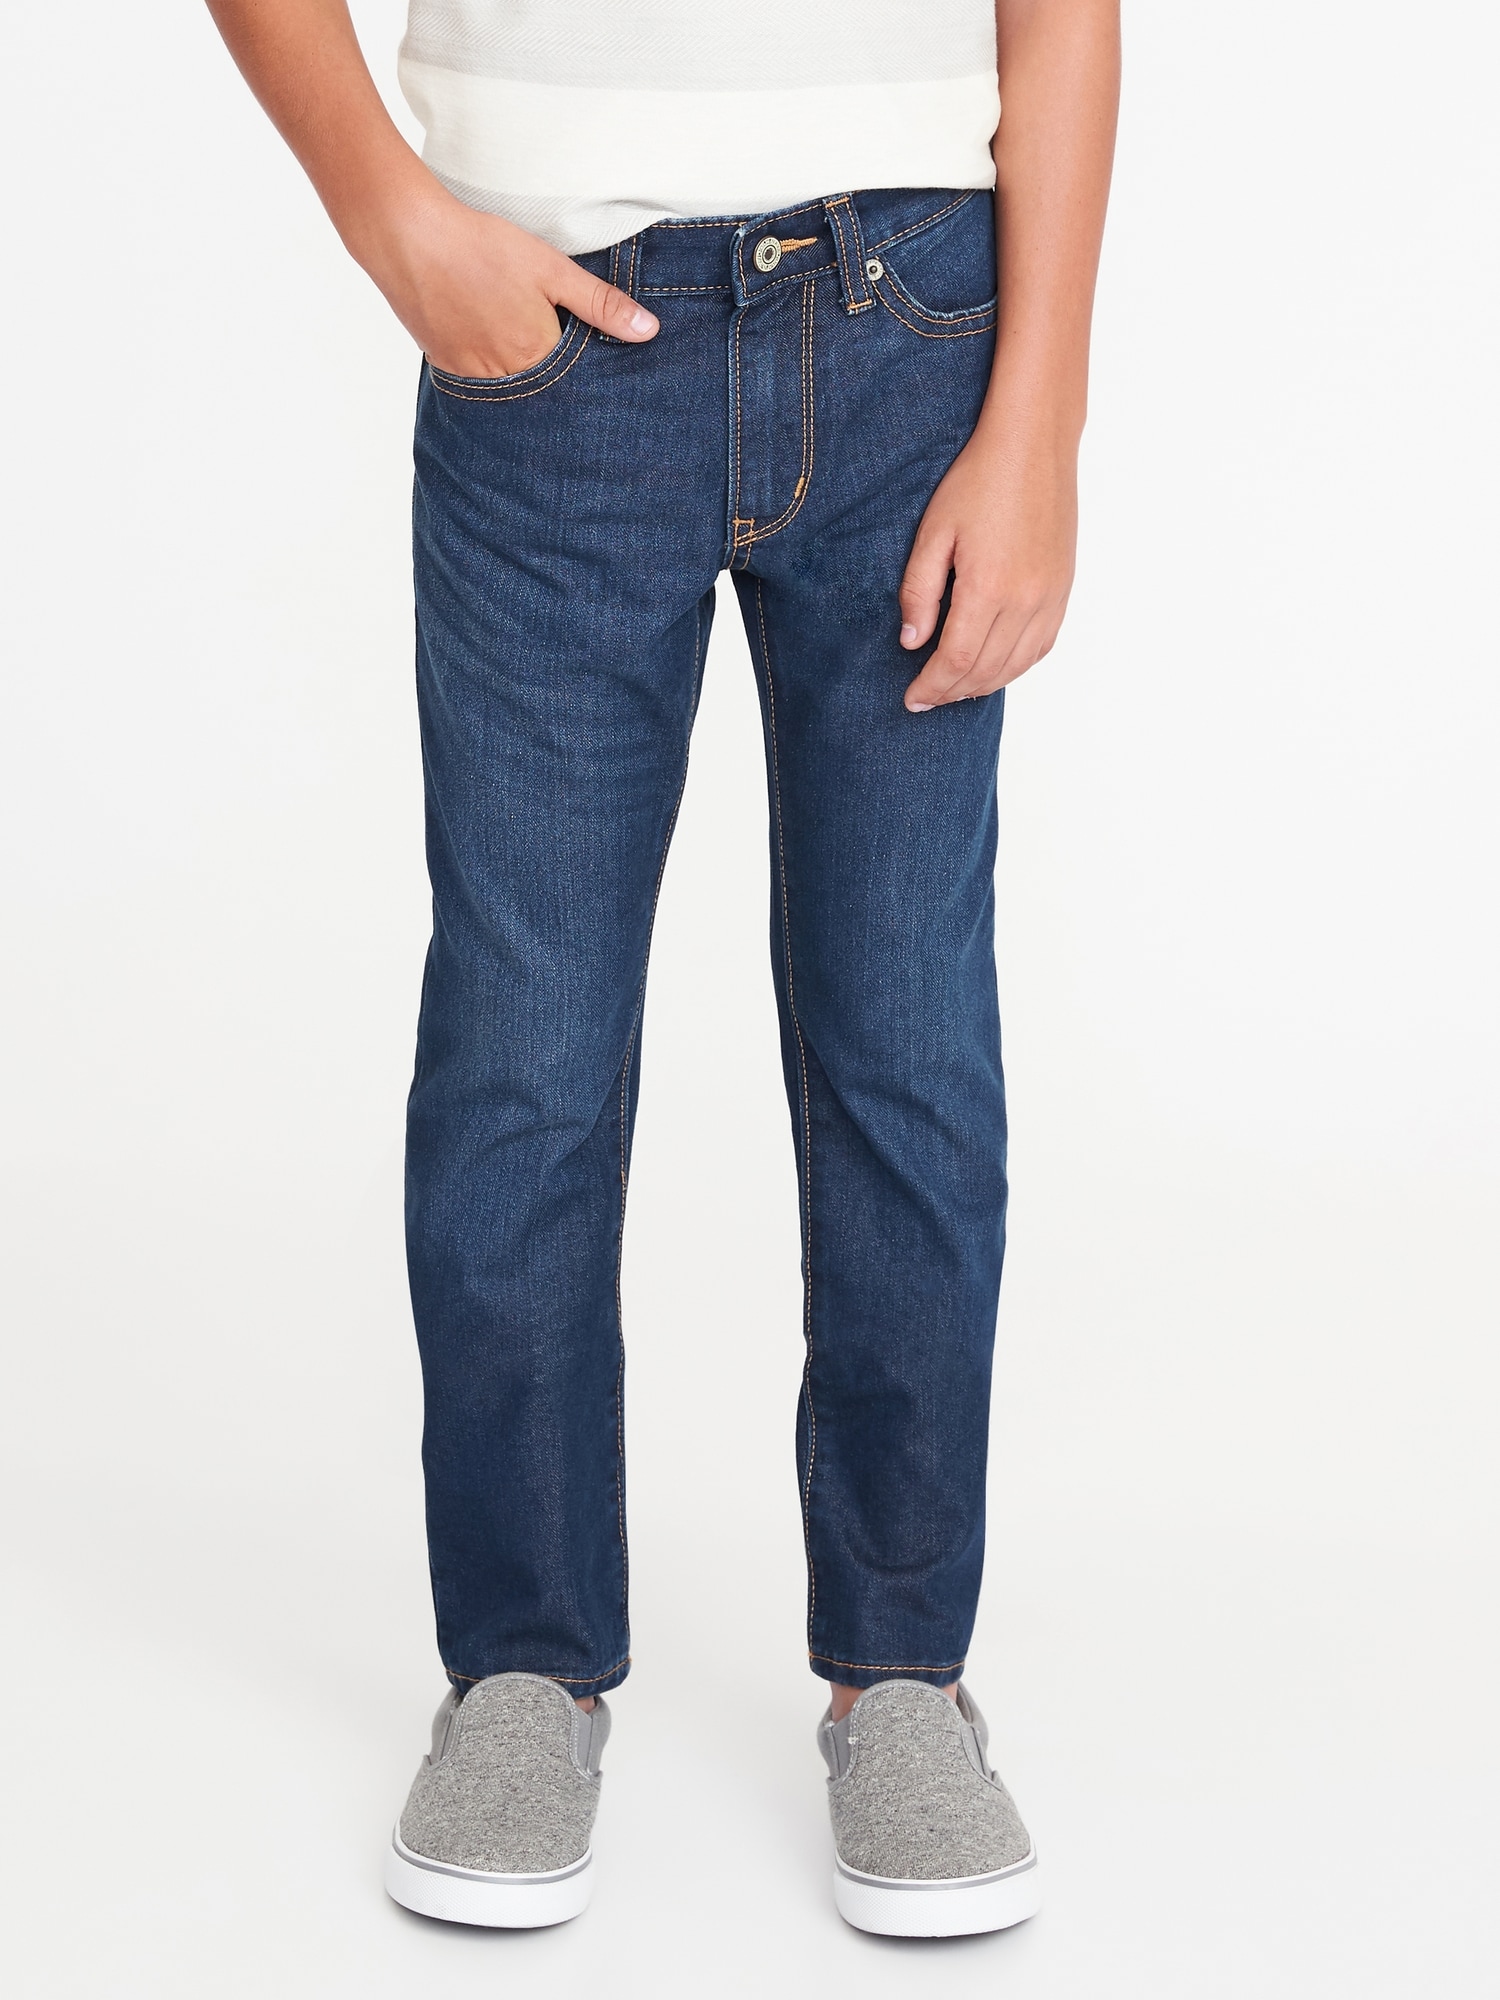 Wow Skinny | Boys Jeans Non-Stretch Old Navy for